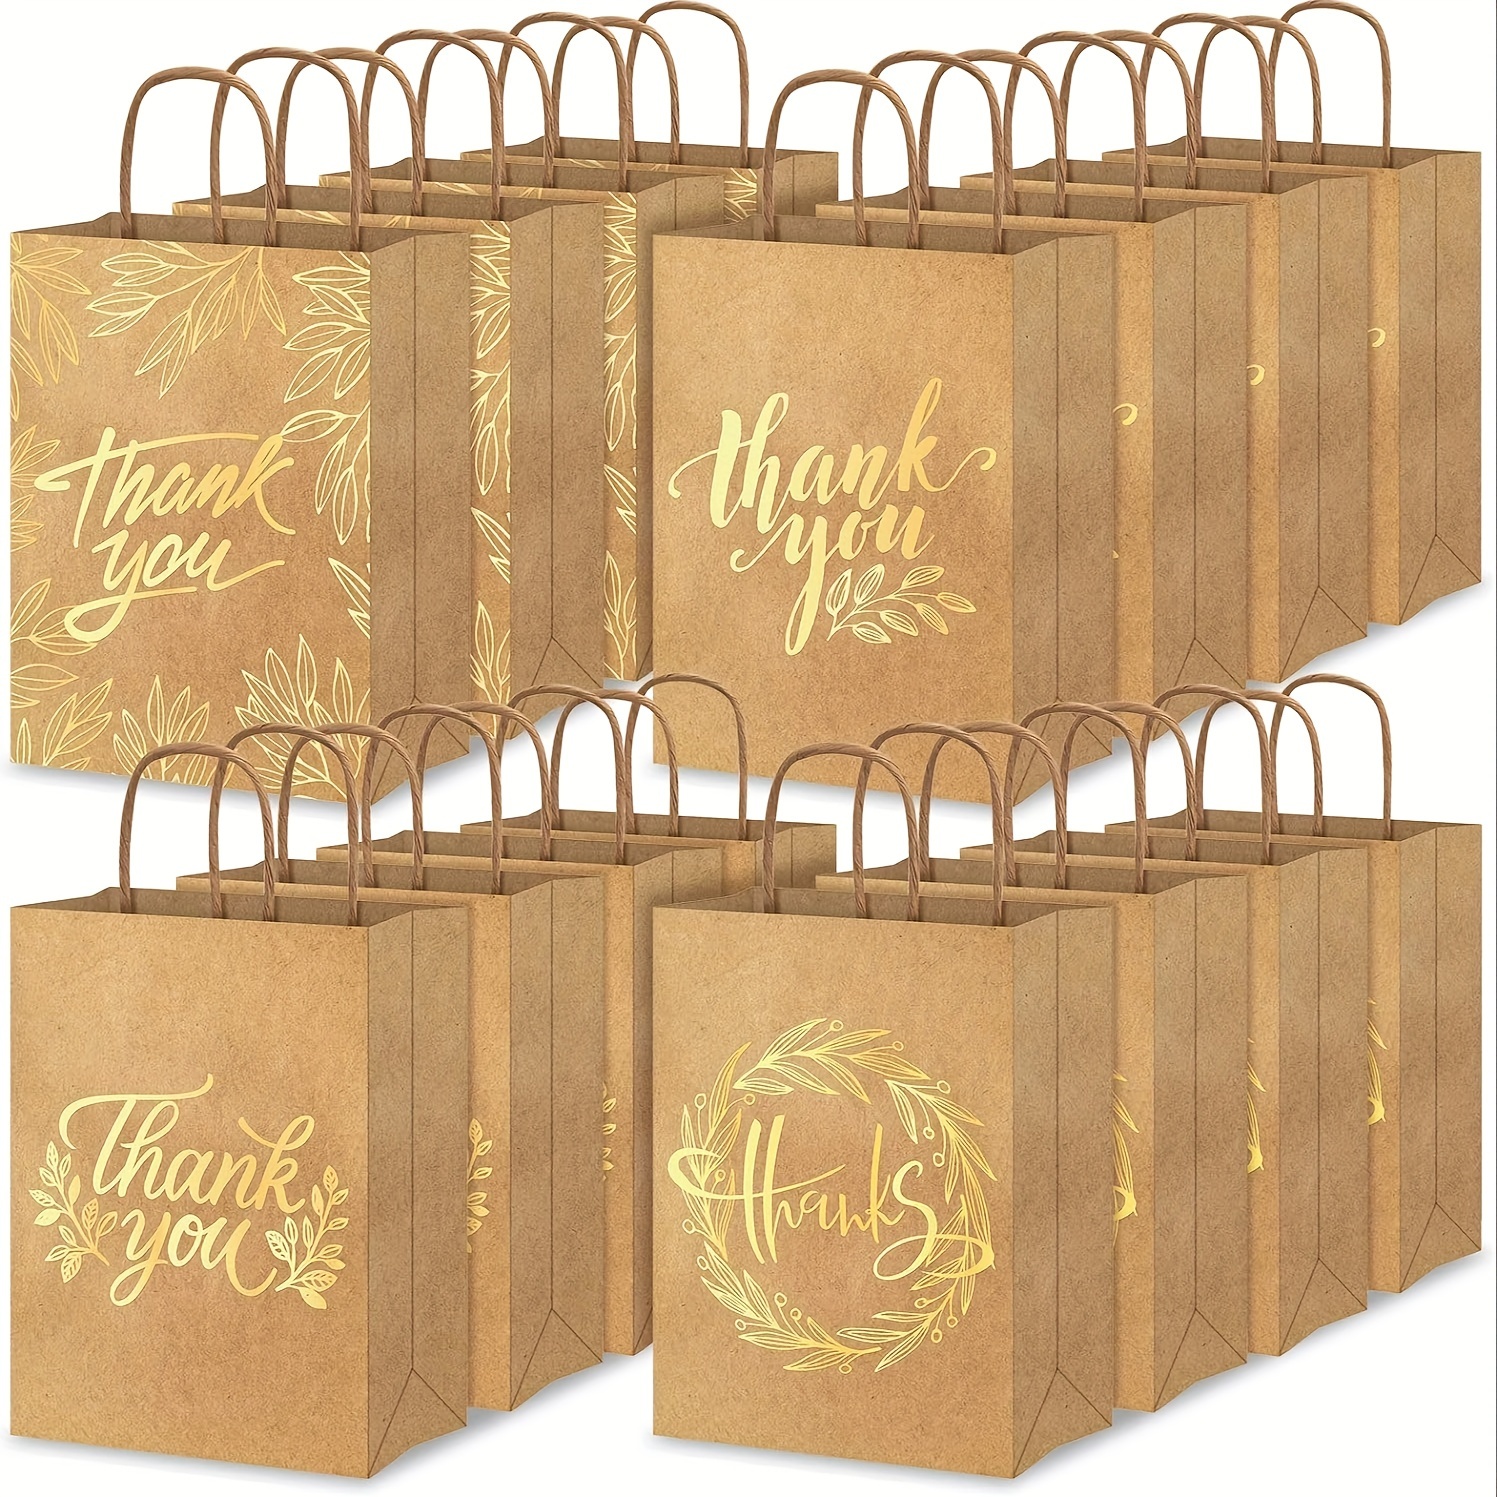 

24pcs Thank You Party Bags Gold Foil Kraft Paper Gift Bags Brown Paper Bags With Handle Party Favor Bags For Wedding Birthday Baby Shower Party Favors